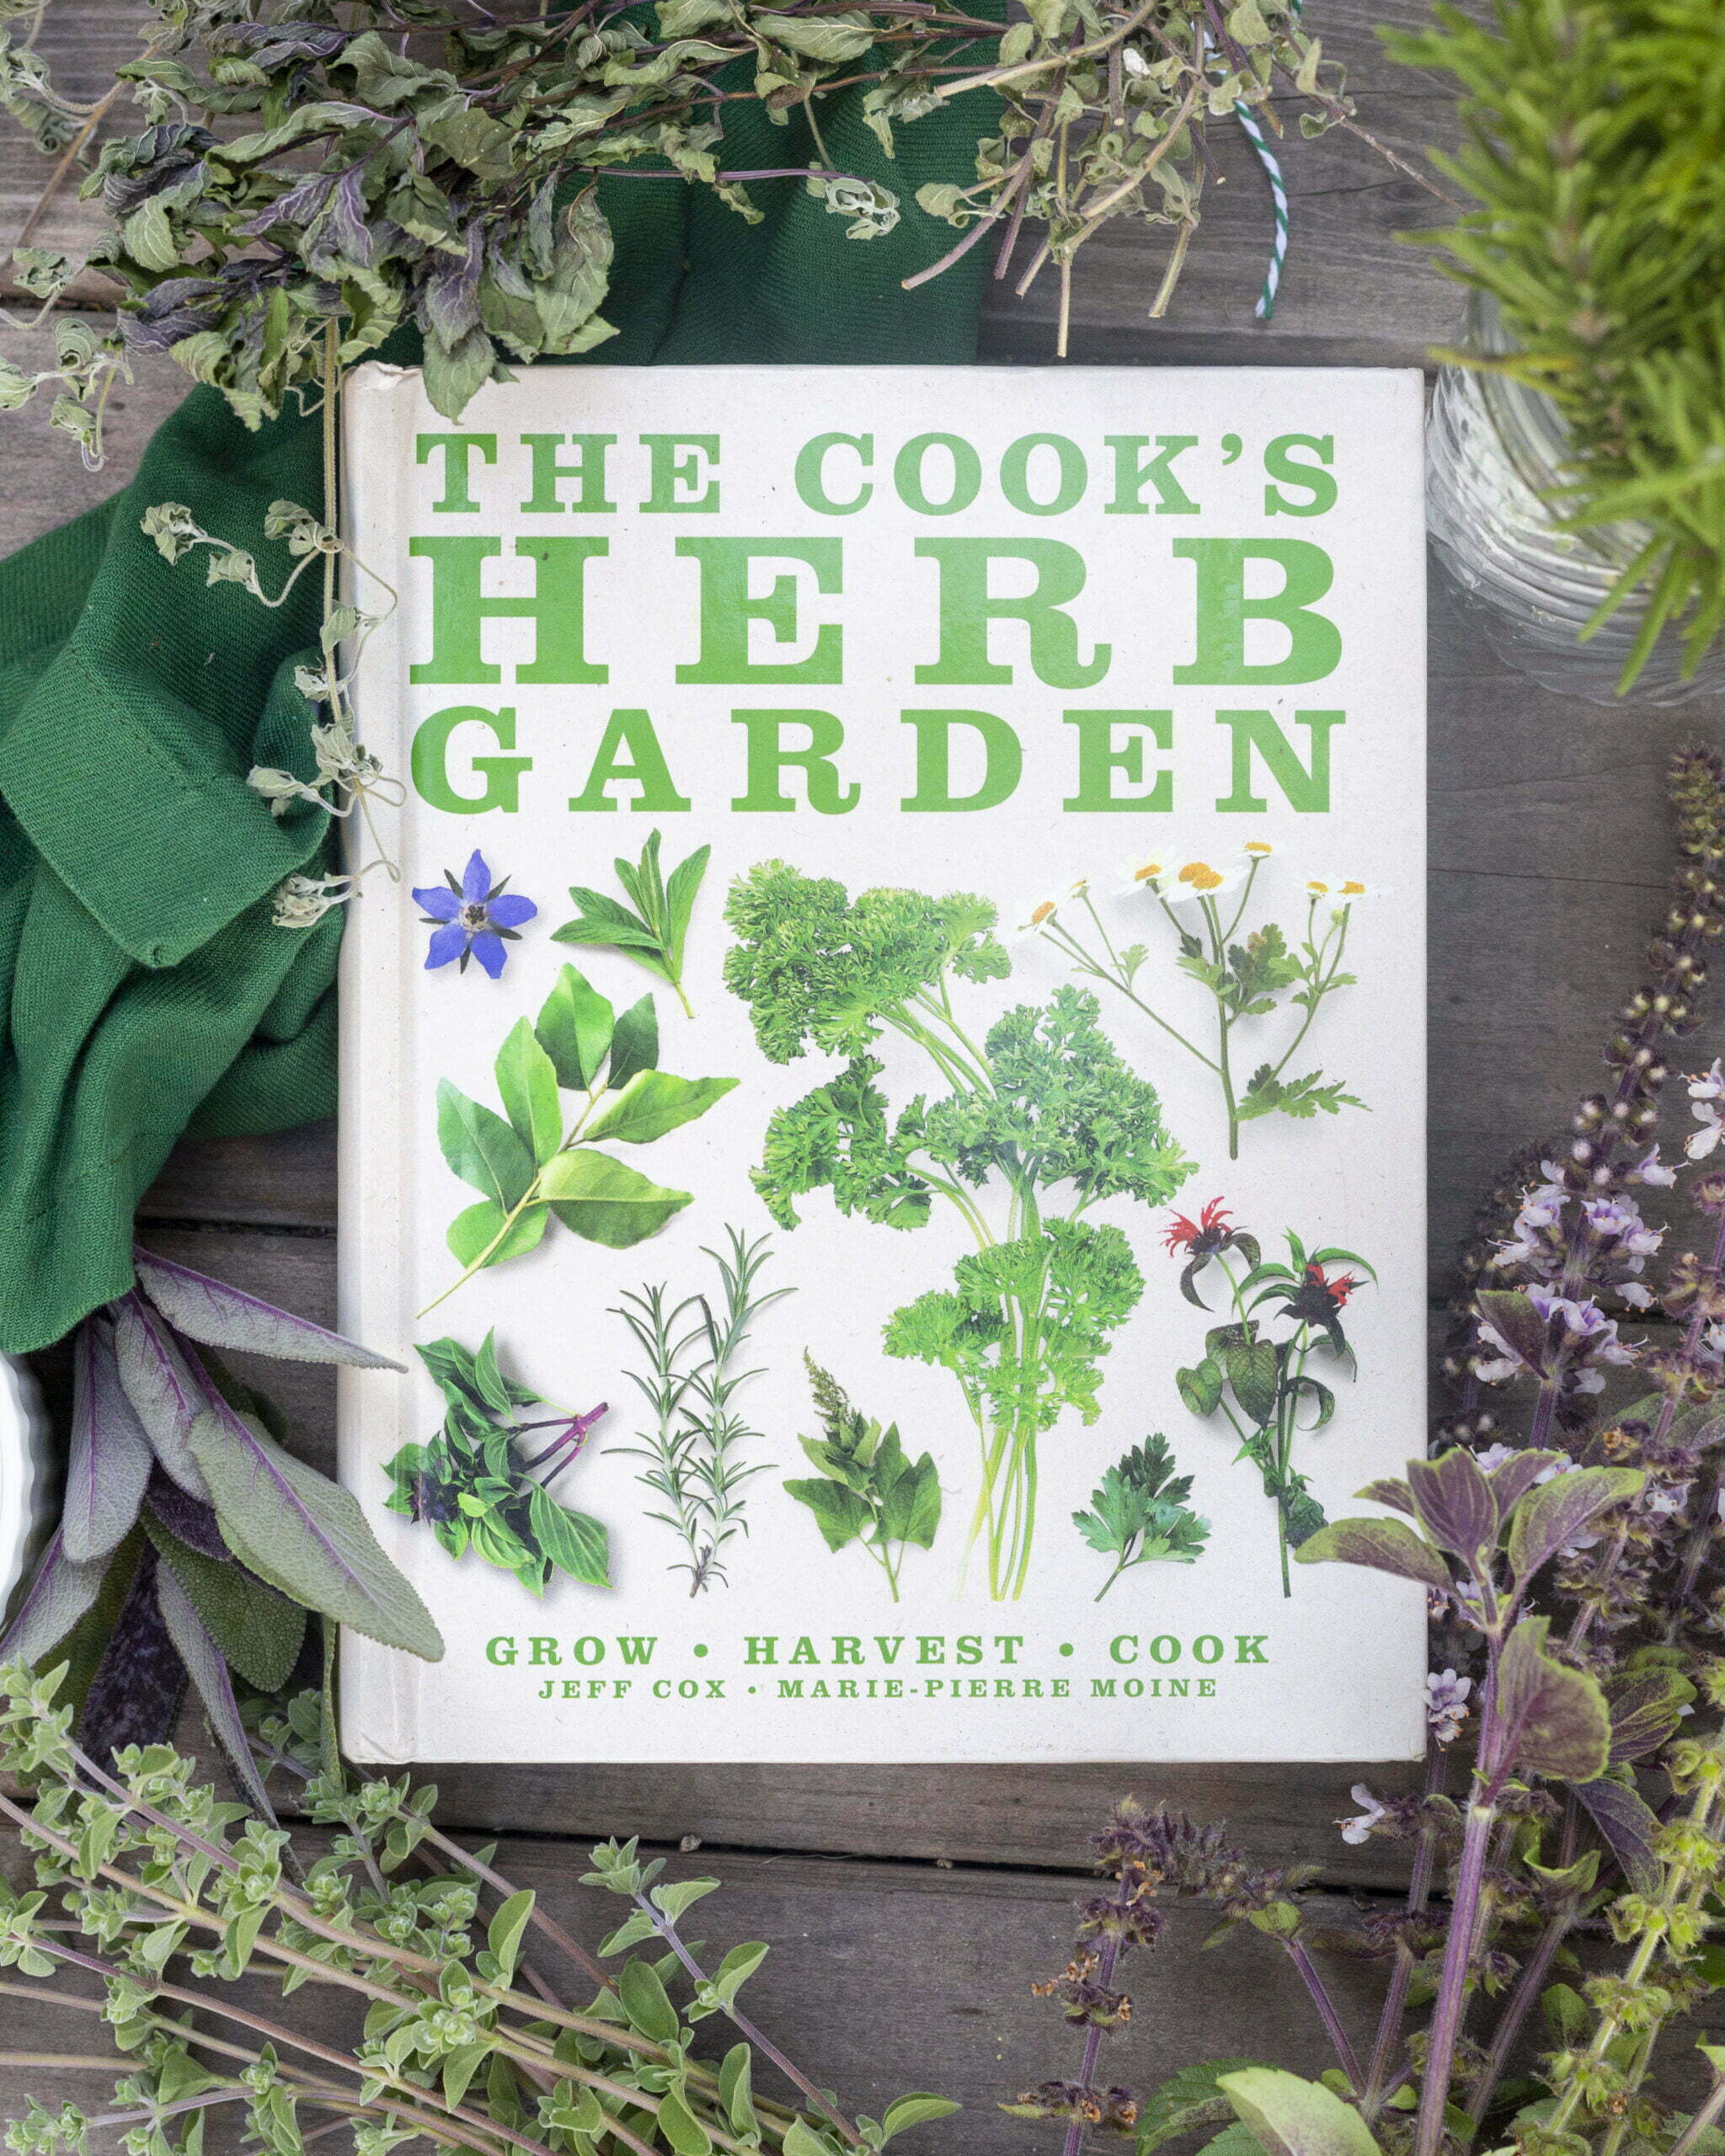 Five Garden Books for Chefs The Cooks Herb Garden: The Cook's Herb Garden